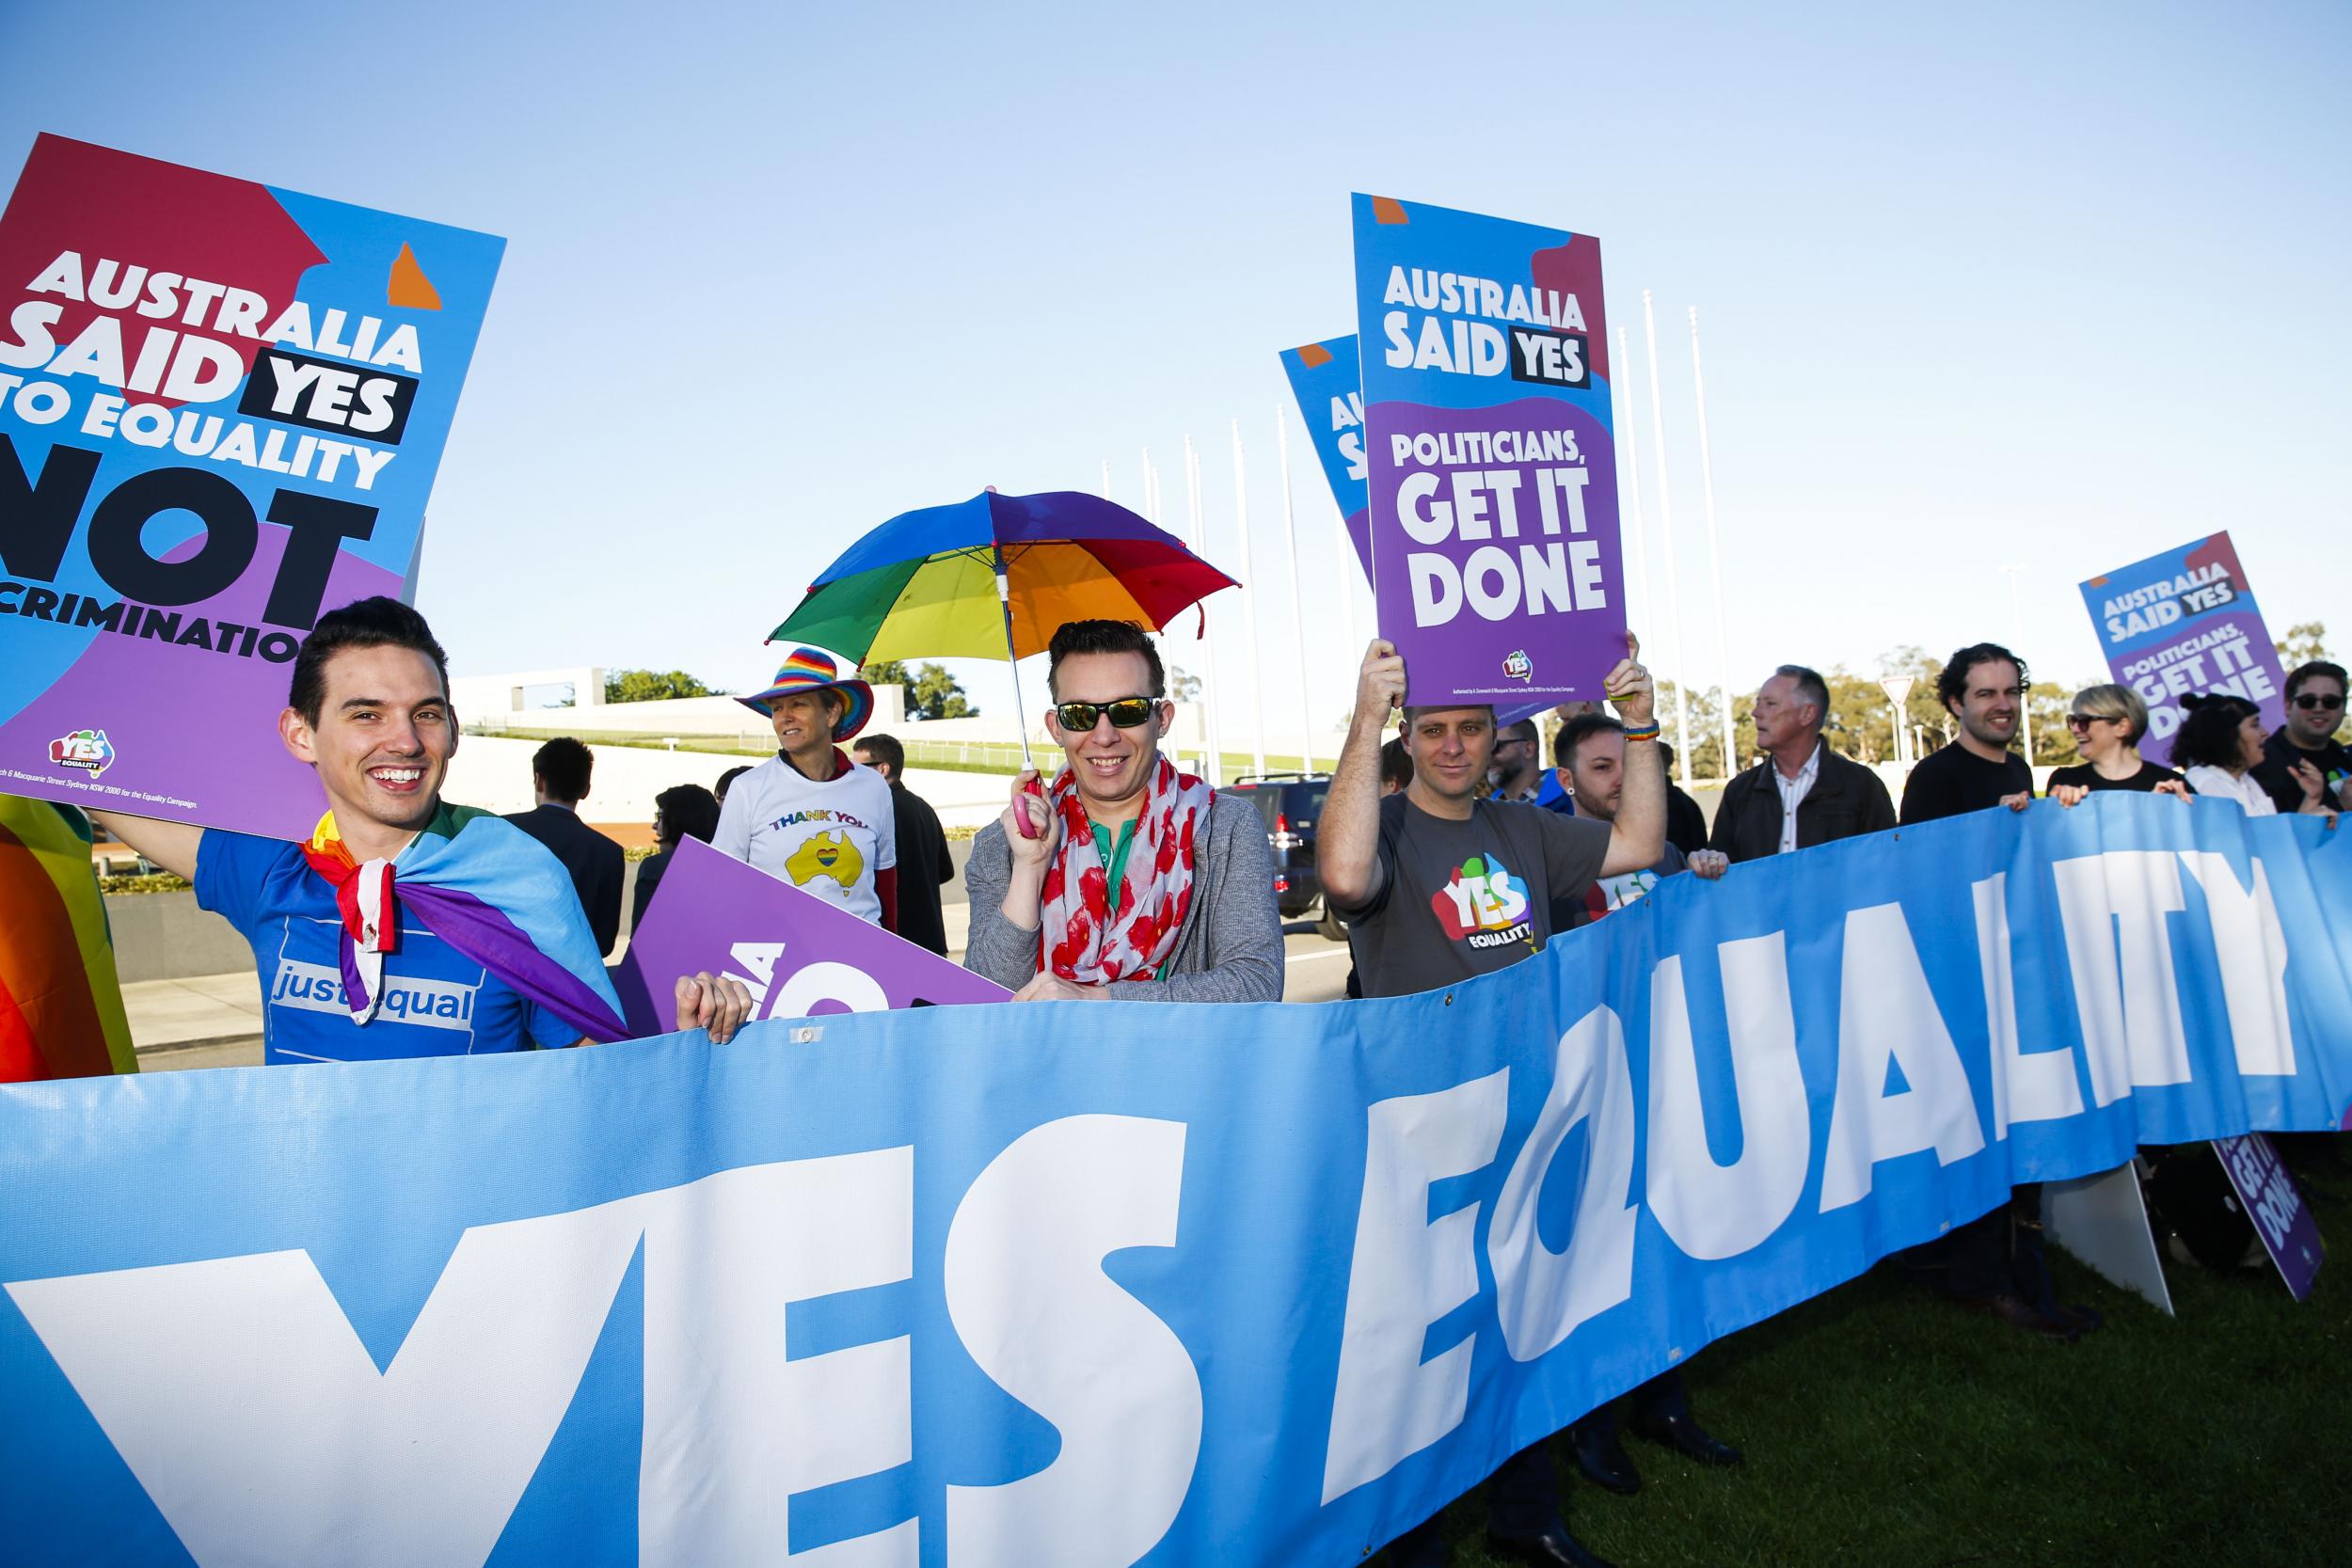 Equality campaigners gather in front of Parliament ahead of the same-sex marriage vote (AFP/Getty Images)